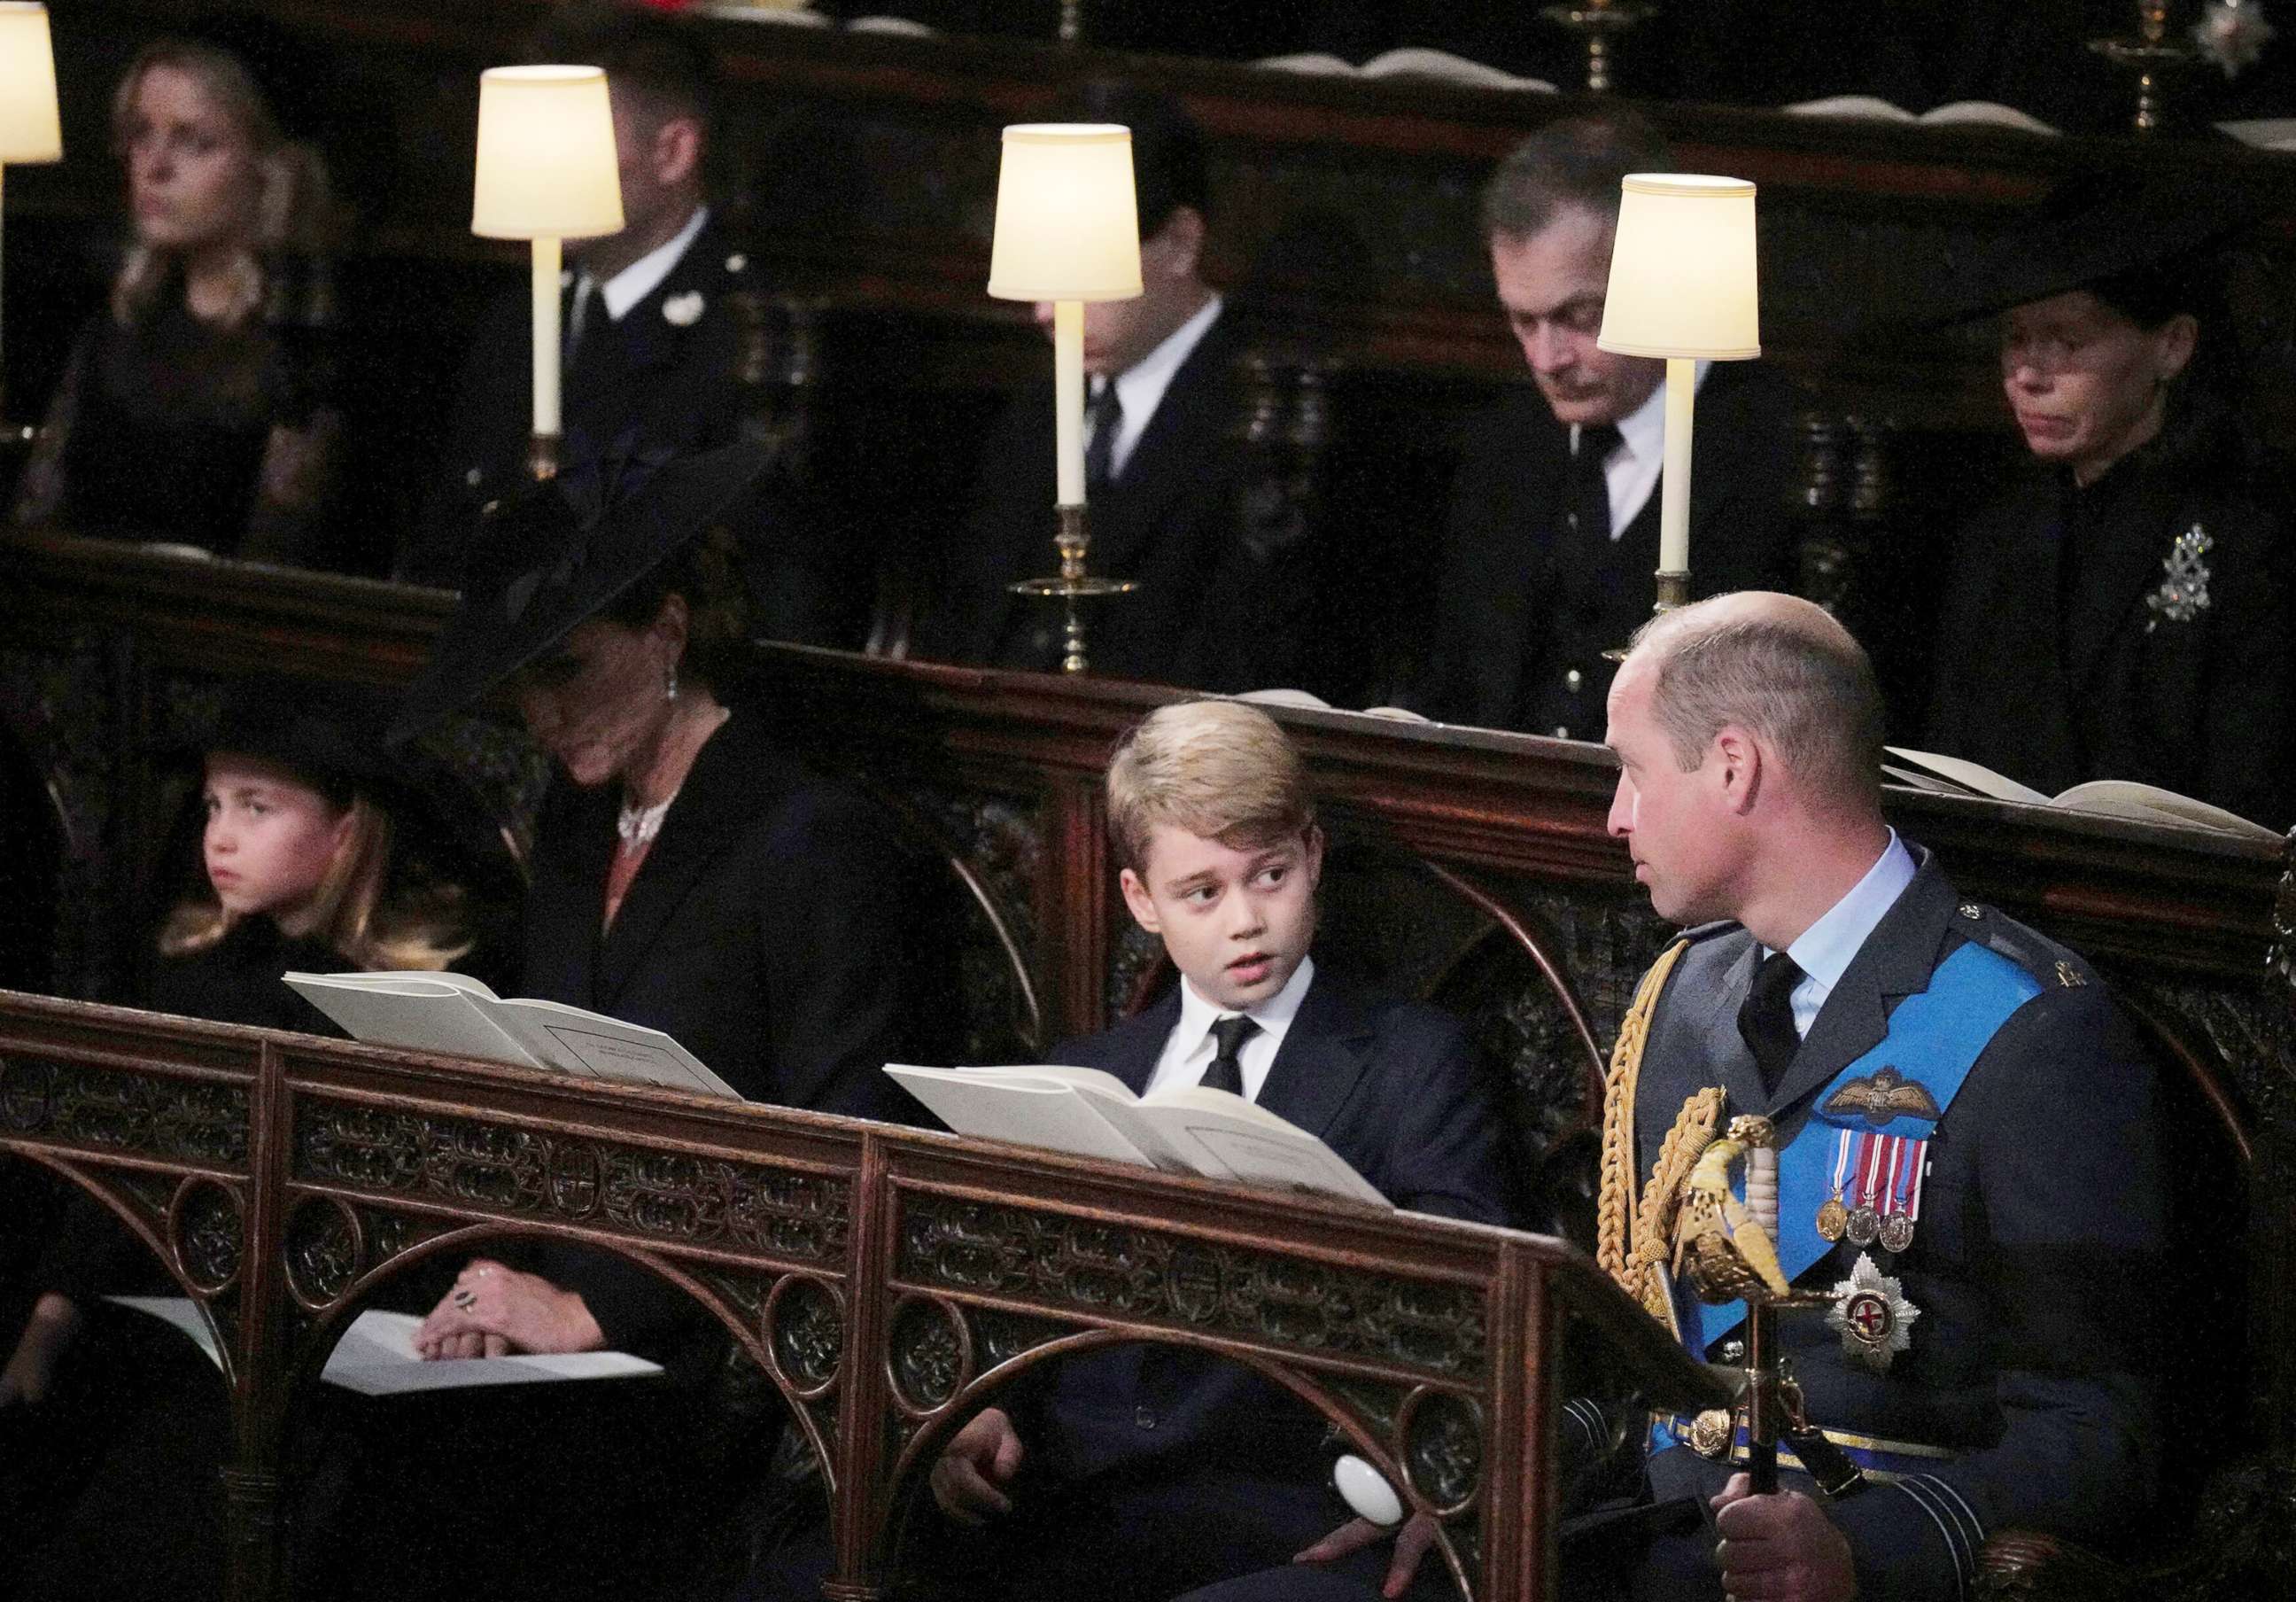 PHOTO: Princess Charlotte, Kate, the Princess of Wales, Prince George, and  Prince William, the Prince of Wales, sit, during the  committal service for Queen Elizabeth II, at St. George's Chapel, in Windsor, England, Sept. 19, 2022.